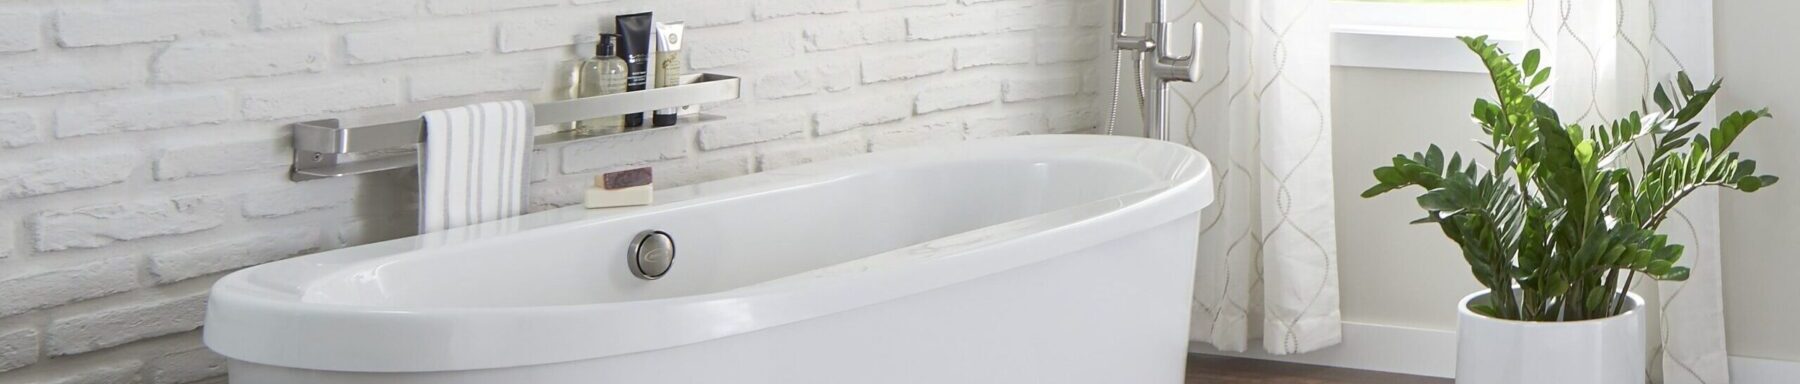 jacuzzi free standing tub min scaled e1695233736135